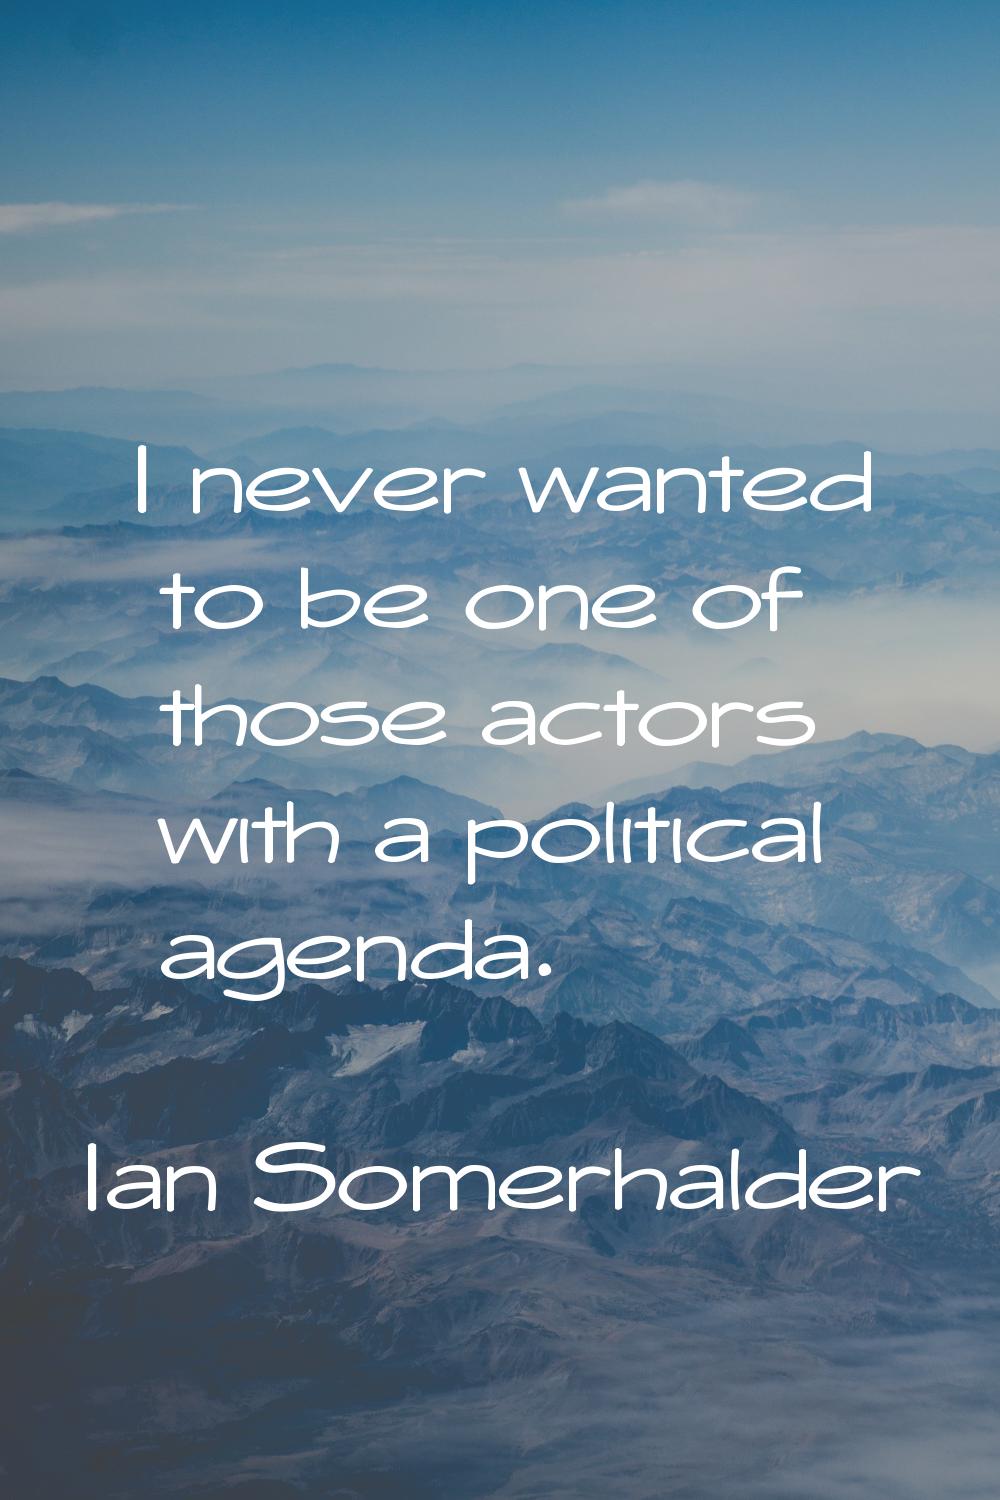 I never wanted to be one of those actors with a political agenda.